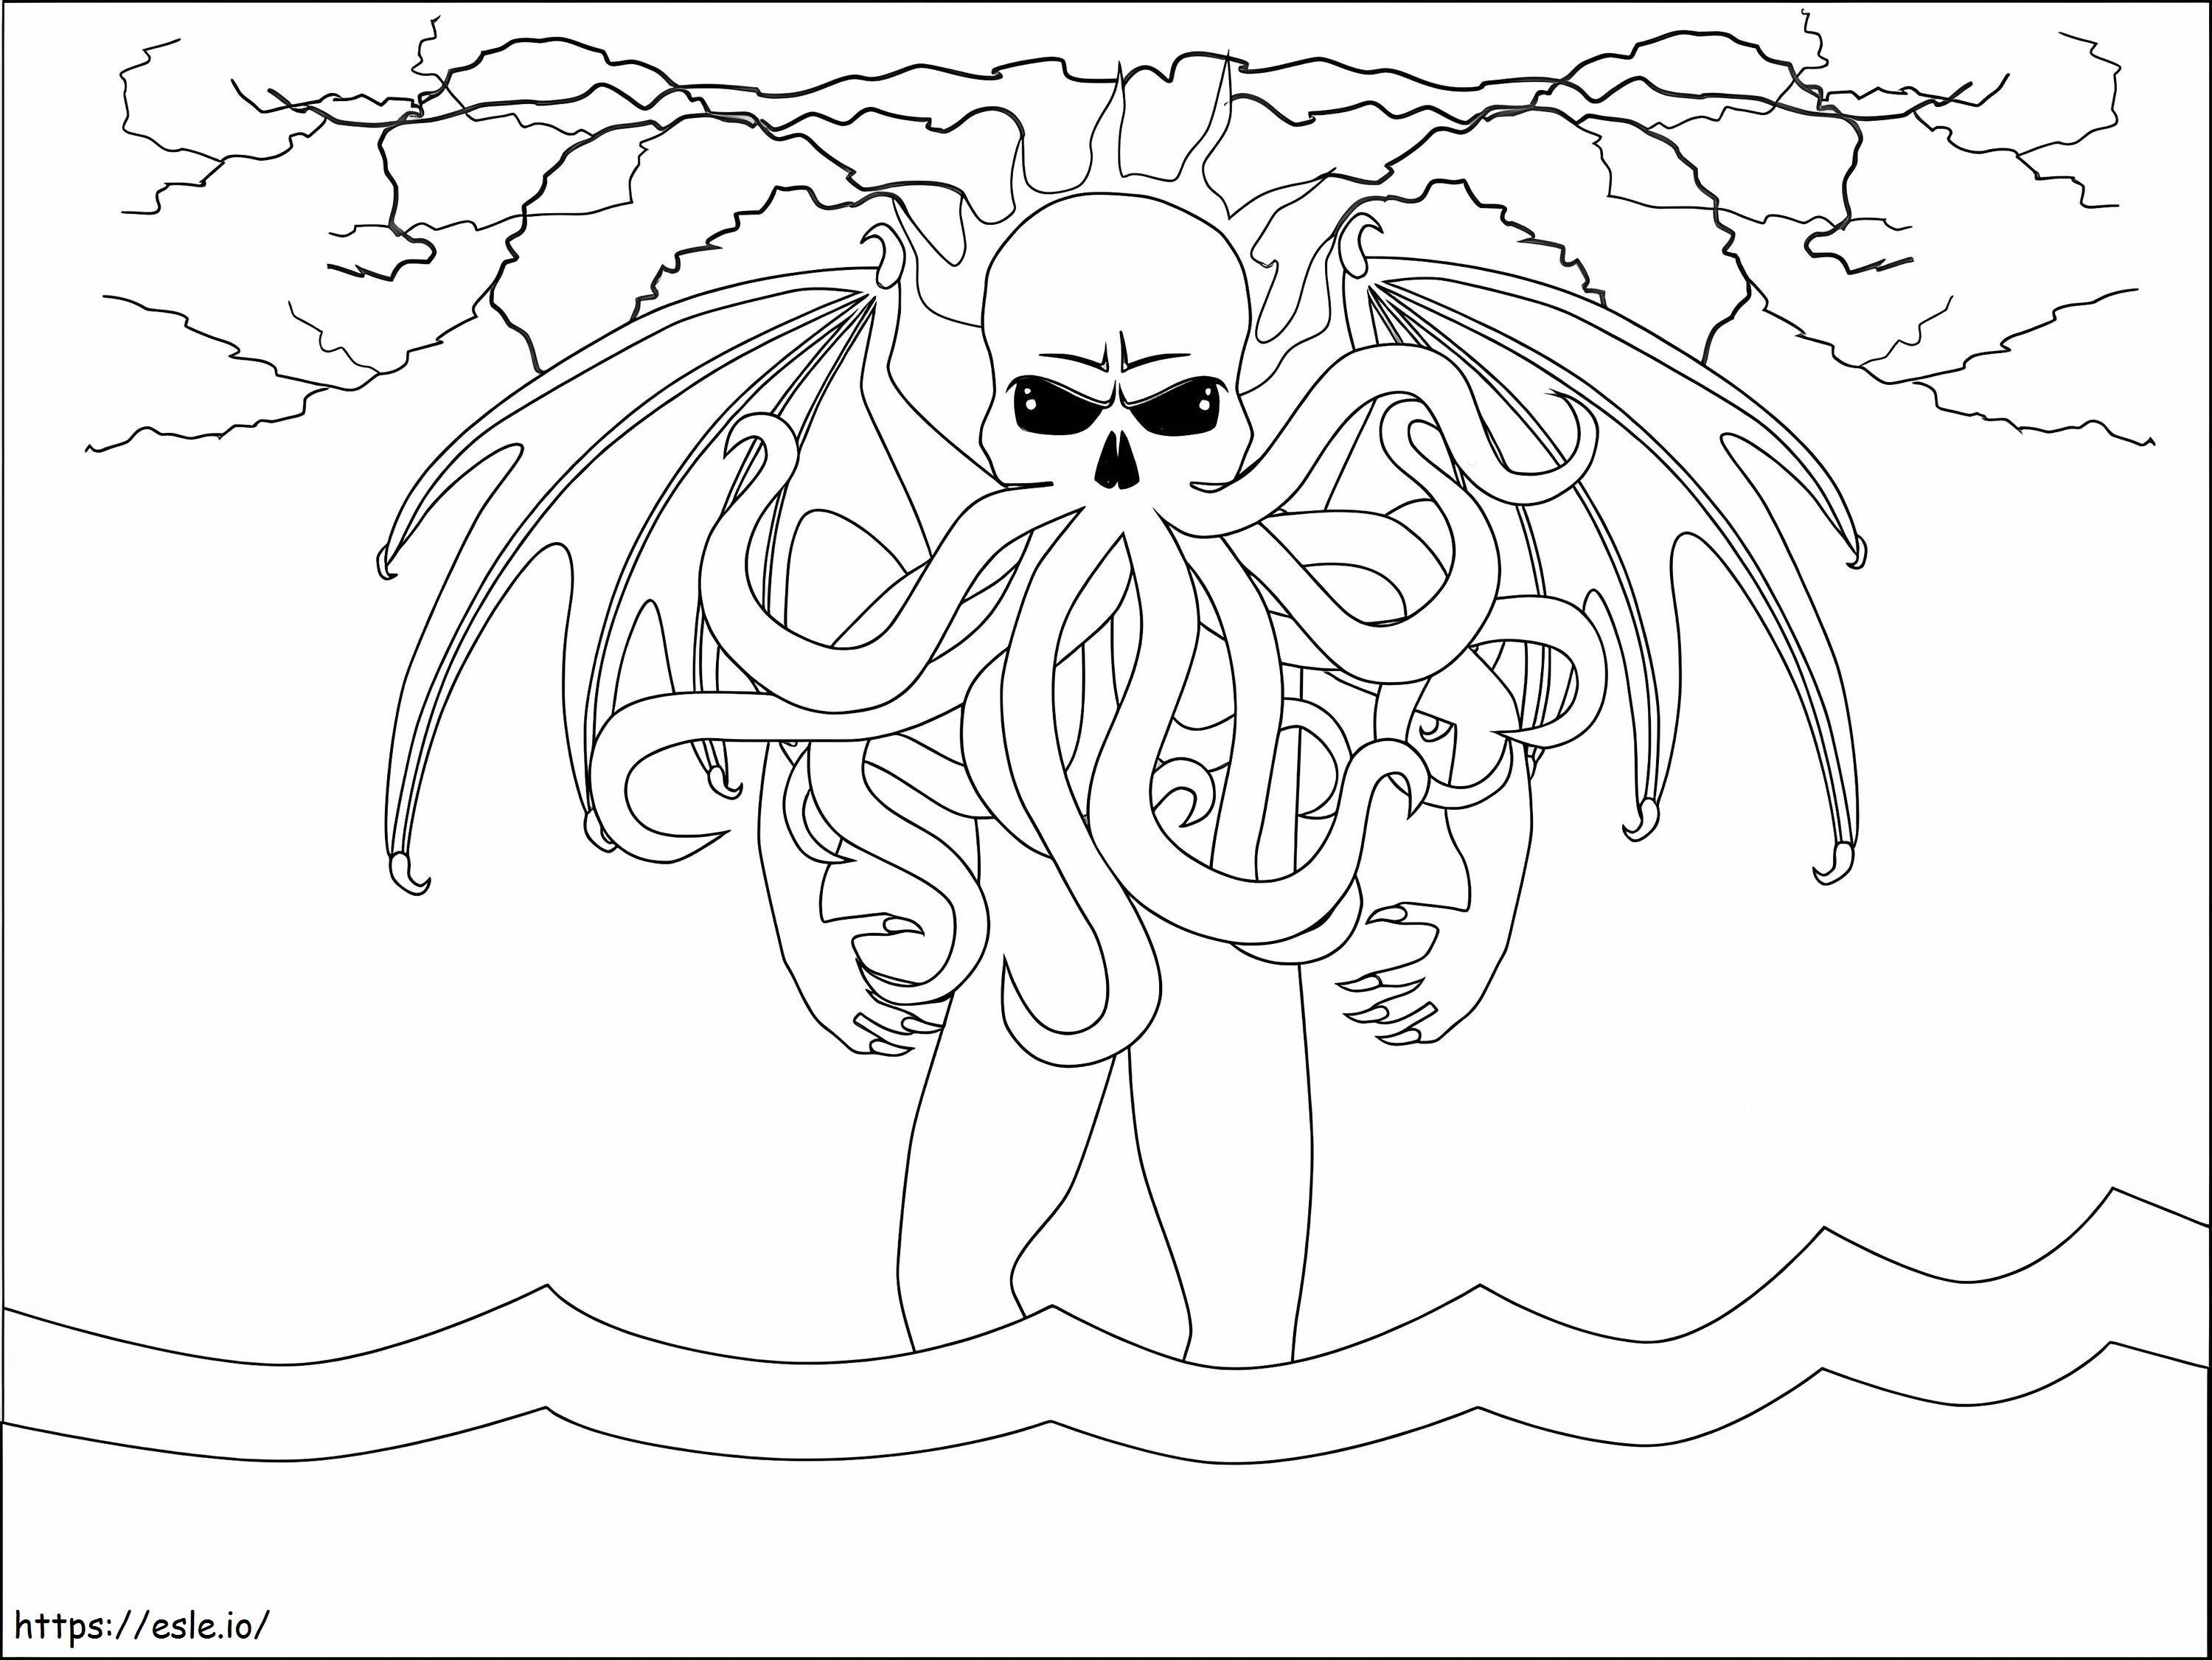 Evil Cthulhu coloring page